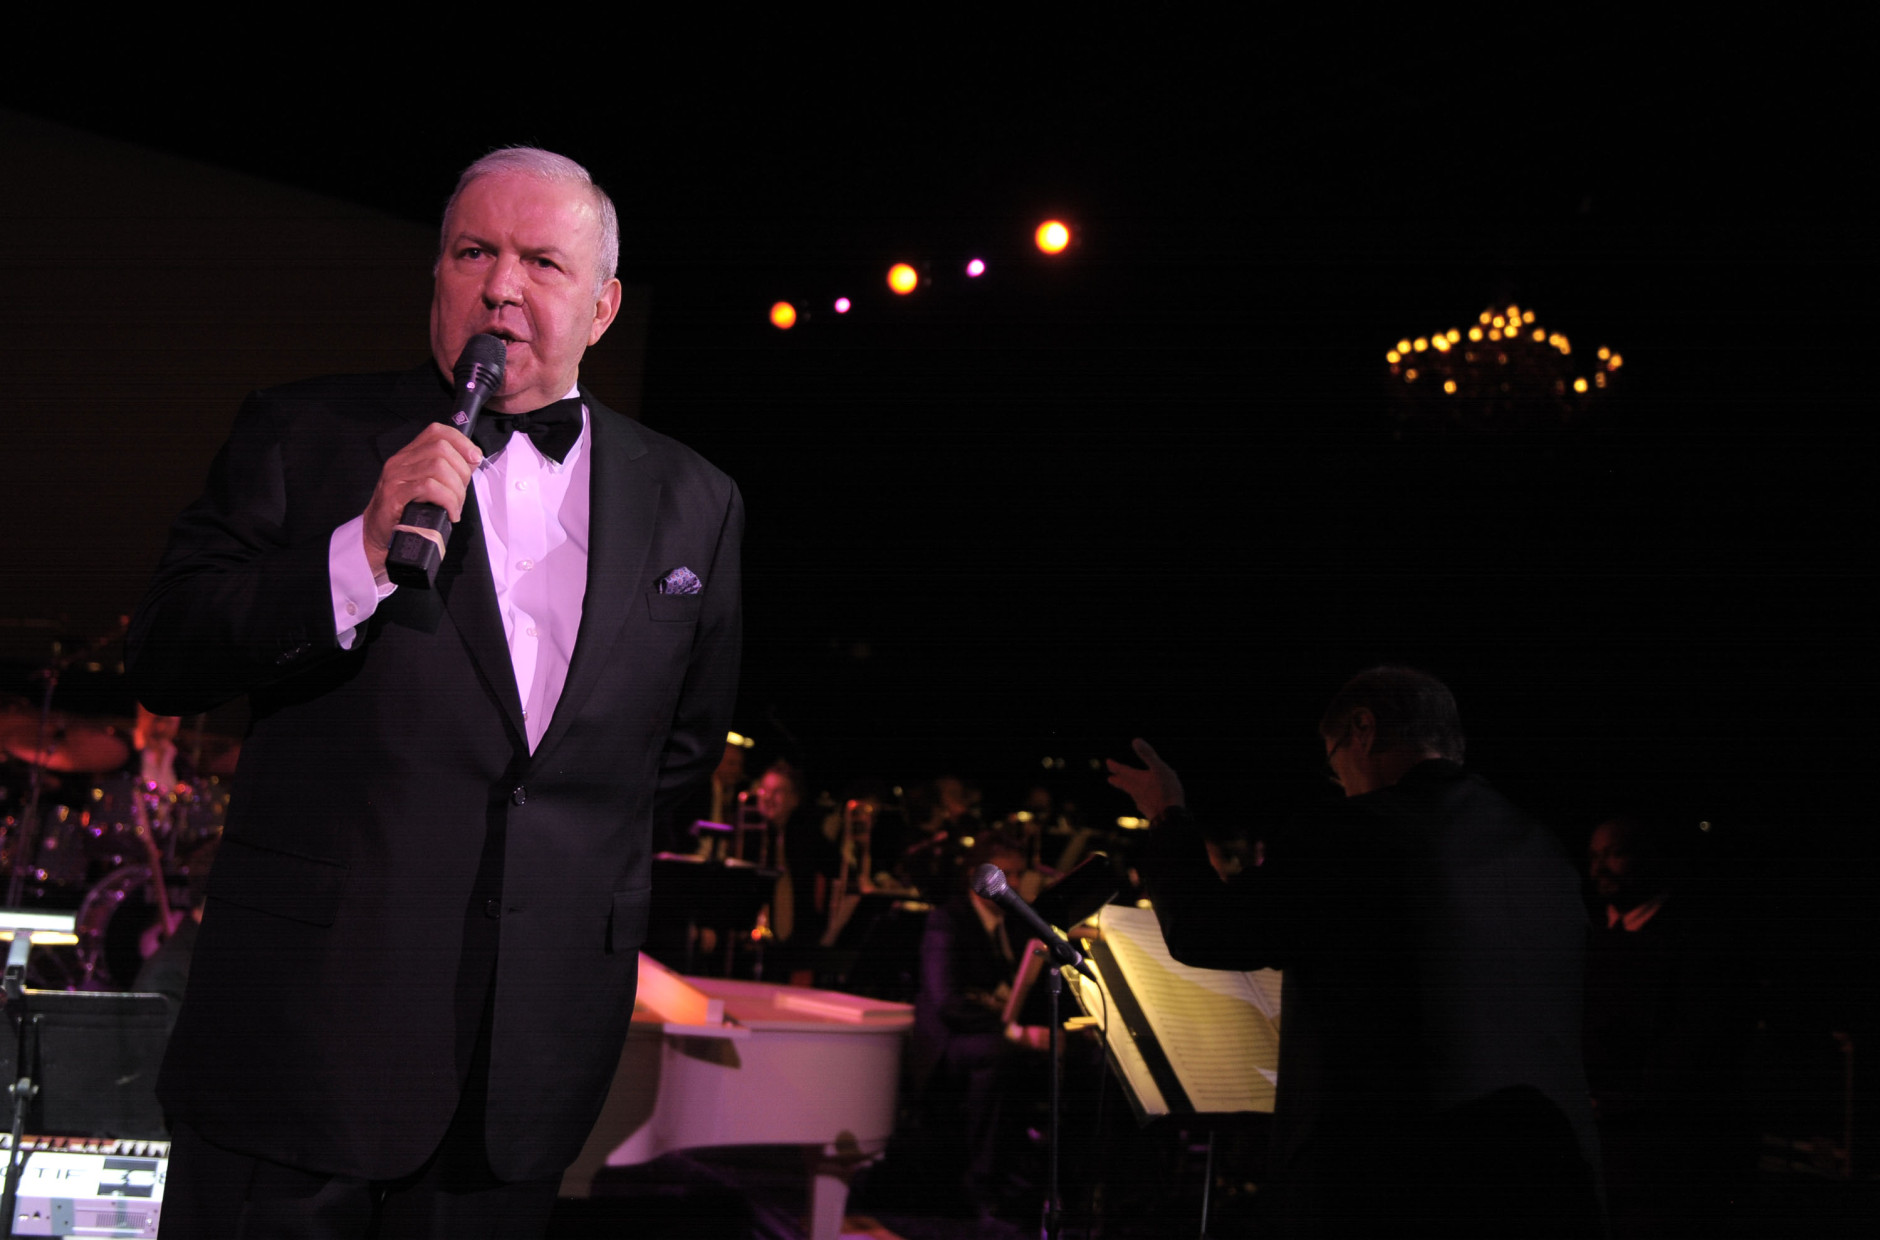 BEVERLY HILLS, CA - OCTOBER 09:  Frank Sinatra Jr. performs at "An Evening Affair" presented by Night Vision at a  private residence on October 9, 2010 in Beverly Hills, California.  (Photo by Charley Gallay/Getty Images for Night Vision)